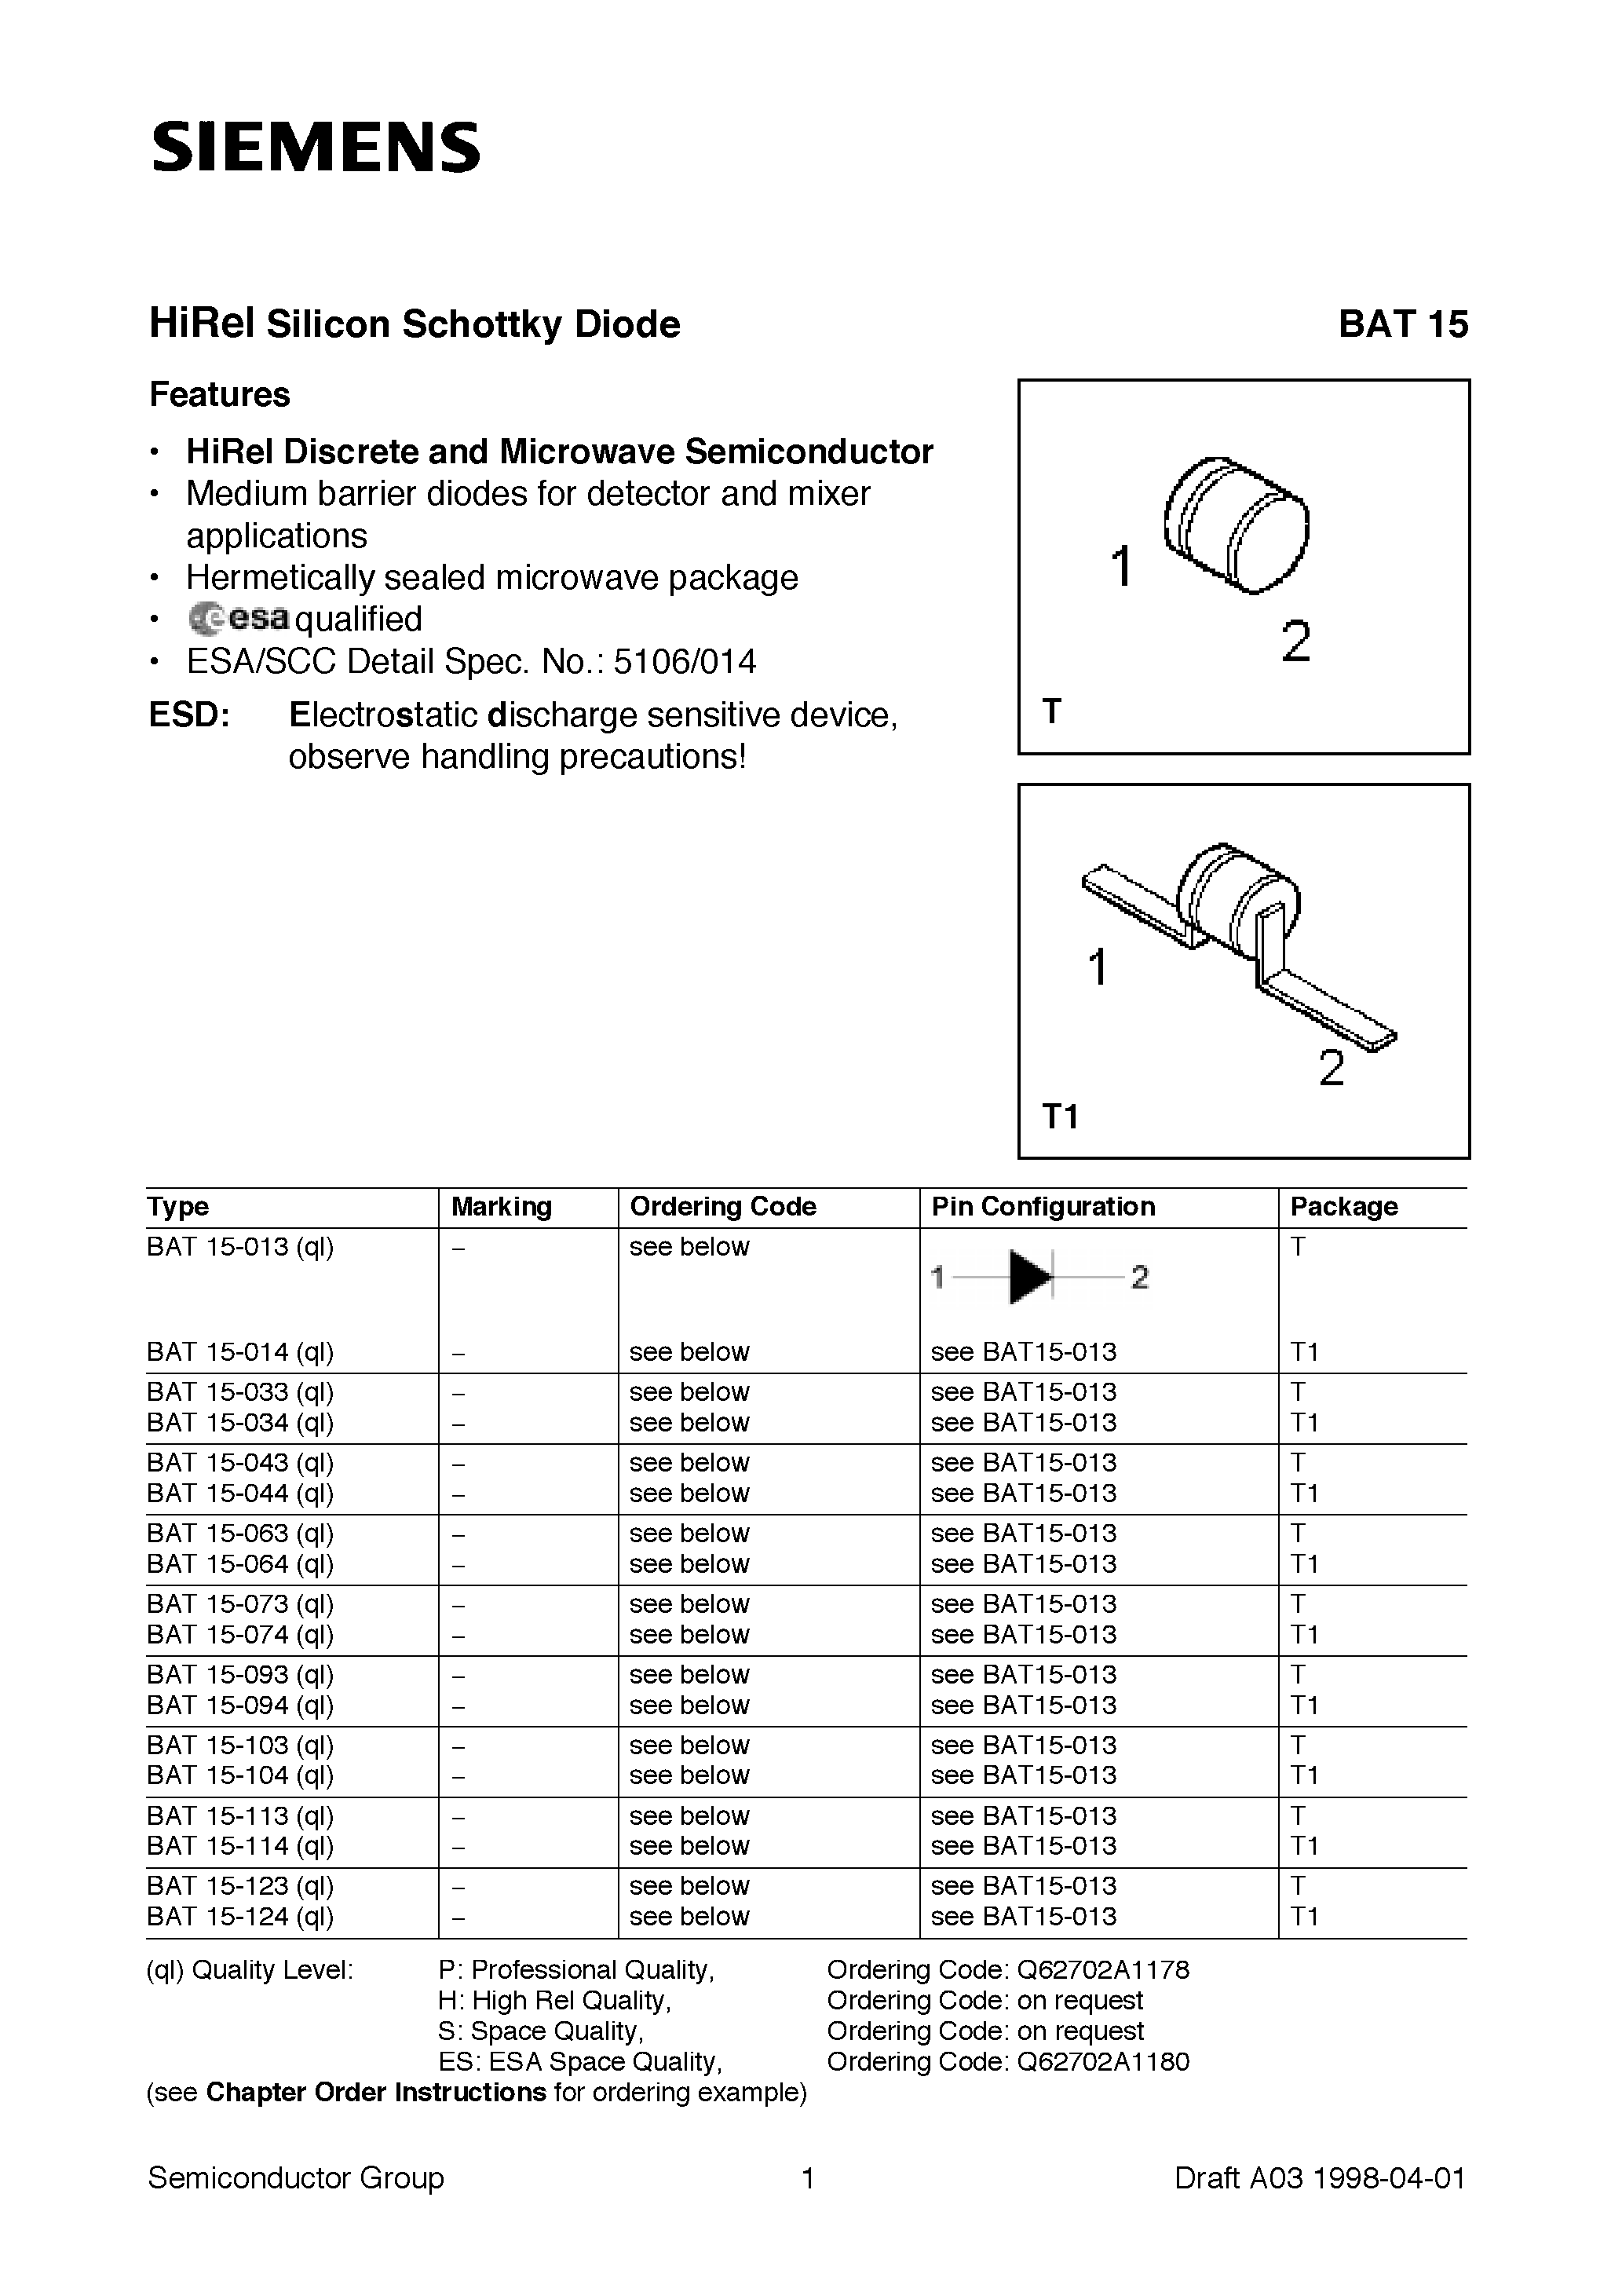 Datasheet BAT15-093 - HiRel Silicon Schottky Diode (HiRel Discrete and Microwave Semiconductor Medium barrier diodes for detector and mixer applications) page 1